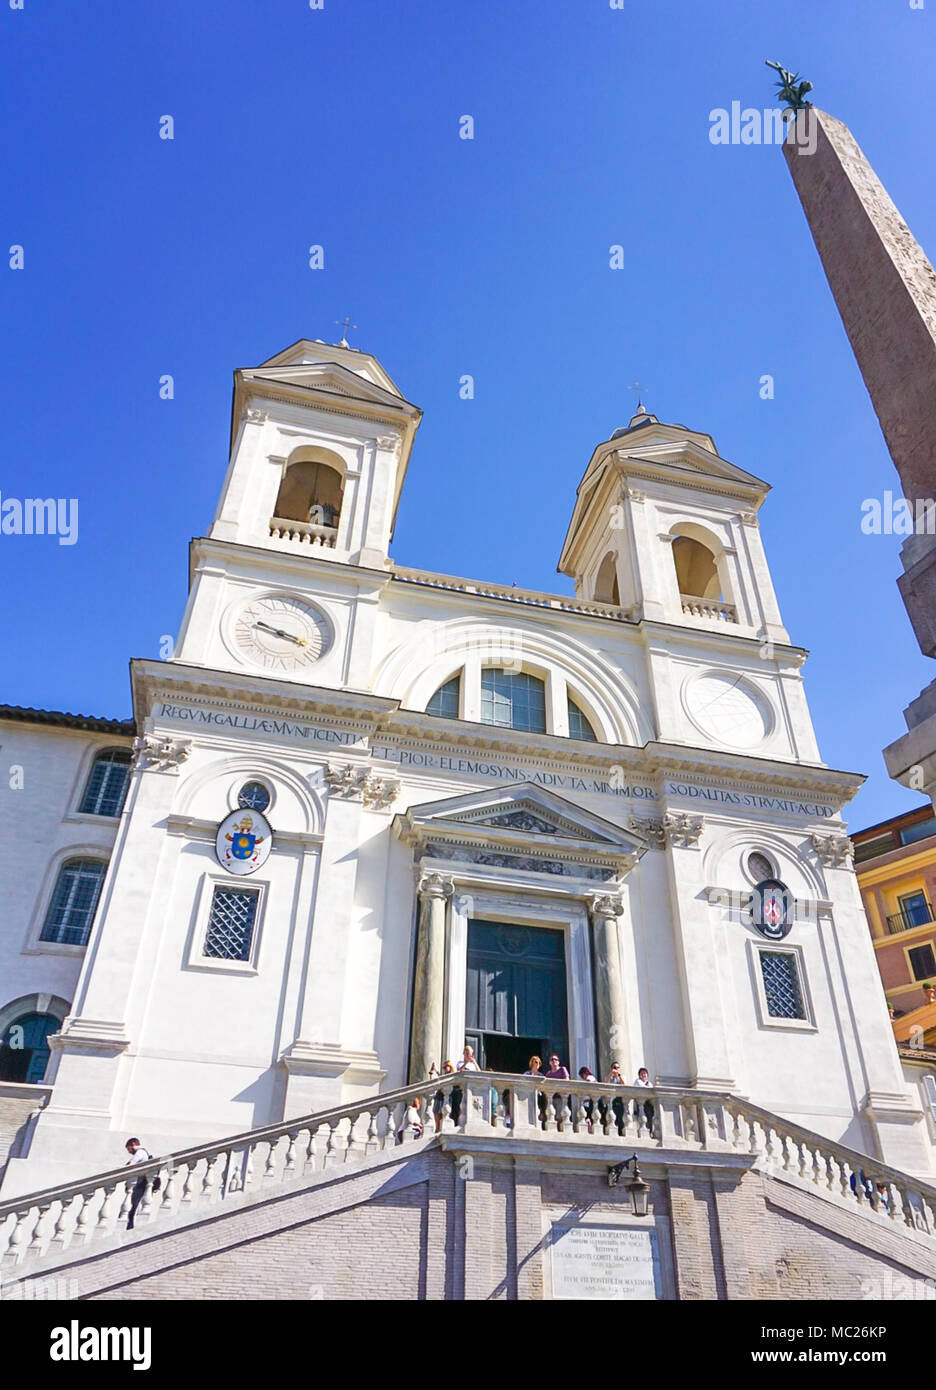 The exterior of the church of the Santissima Trinita dei Monti in Rome, Italy above the Spanish Steps which lead down to Piazza di Spagna. Stock Photo